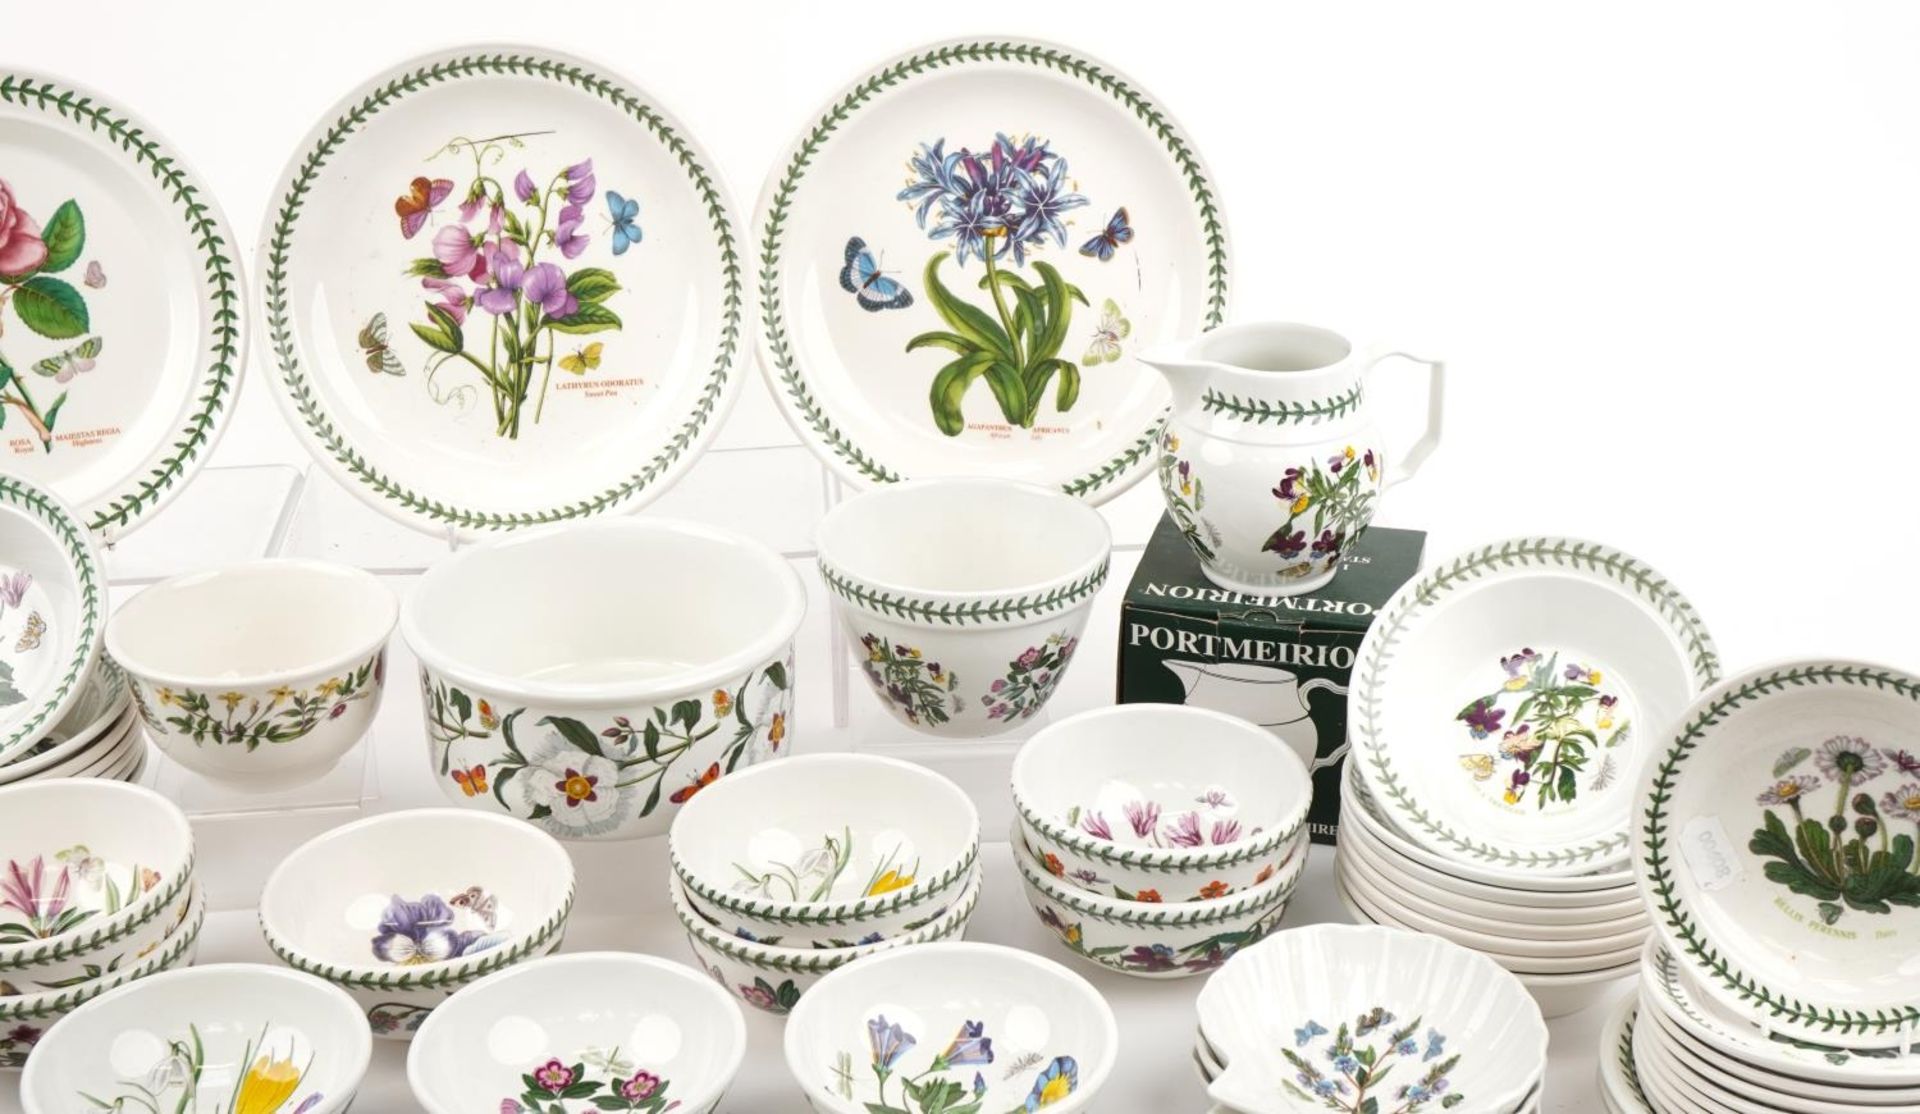 Large collection of Portmeirion Botanic Garden plates, bowls and dishes, the largest 27cm in - Image 6 of 14